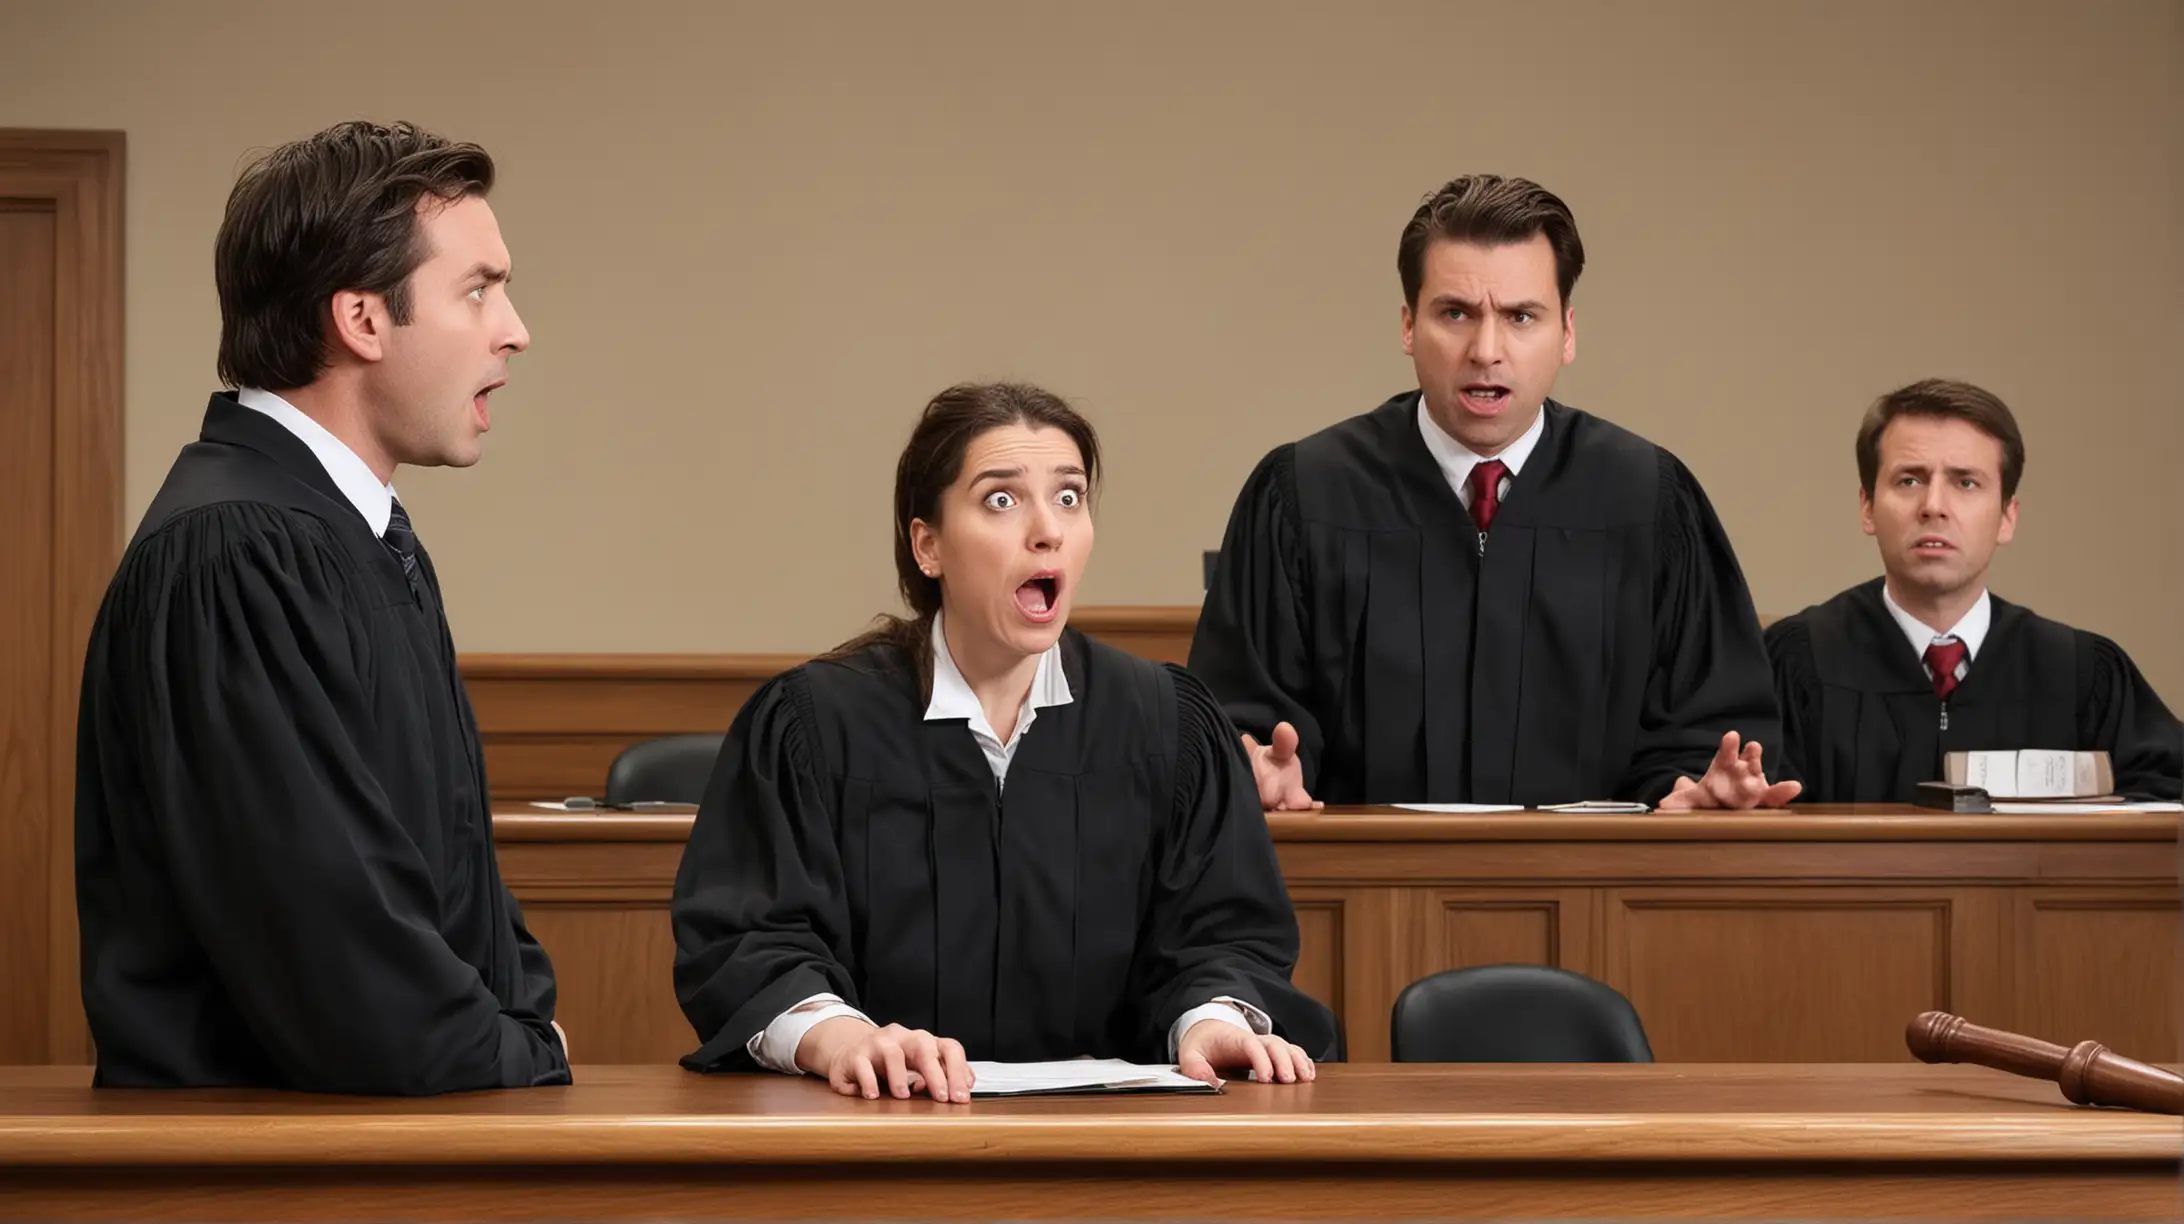 Courtroom Scene with Shocked Judge Attorney and Defendant